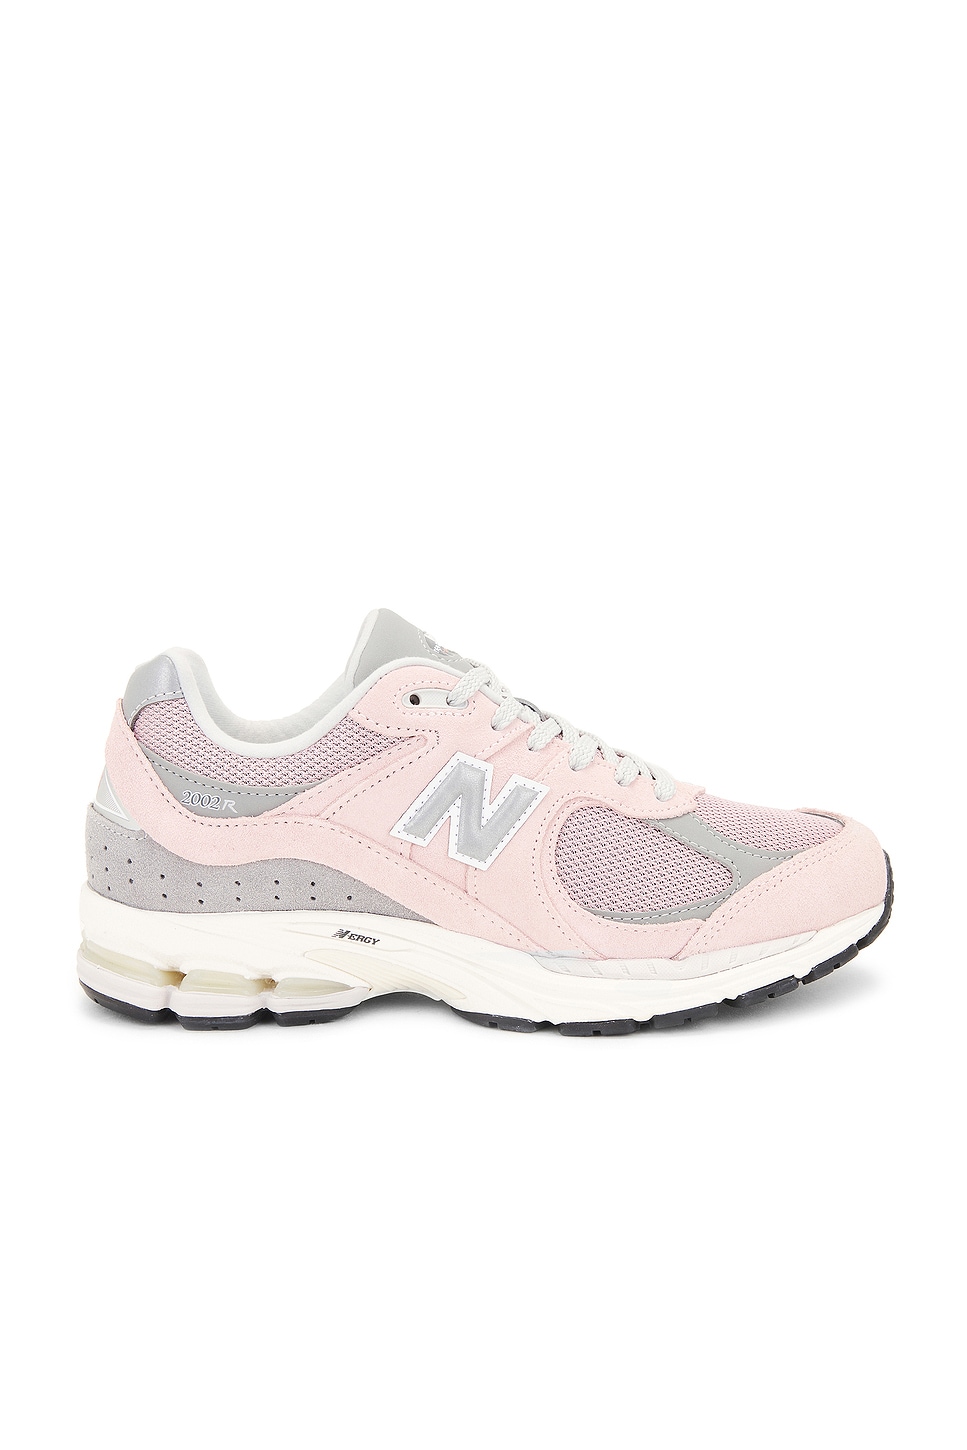 Image 1 of New Balance 2002r in Orb Pink, Shadow Grey, & Silver Metallic